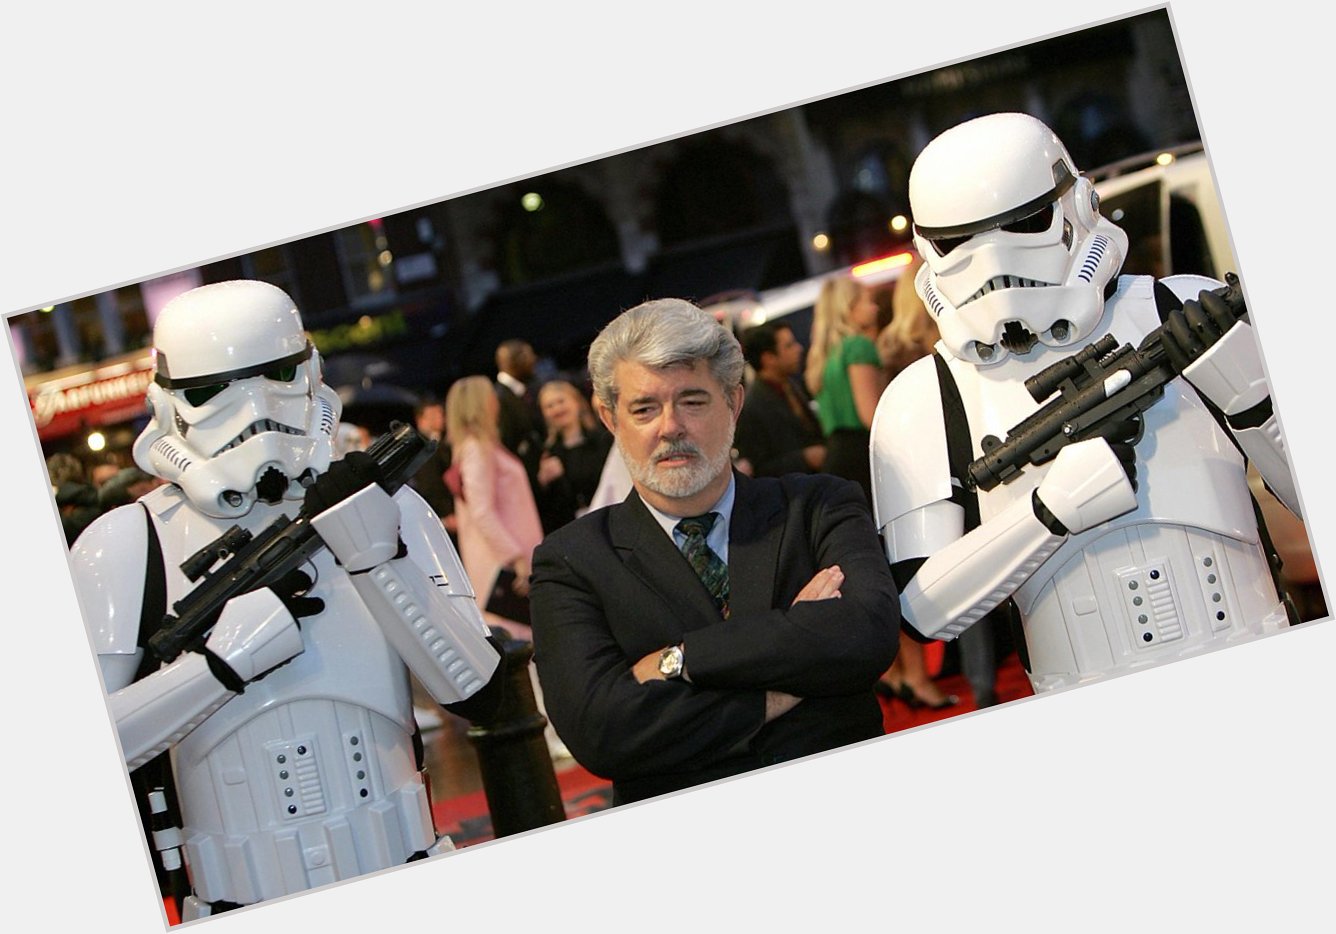 Happy Birthday to George Lucas, who turns 71 today! 